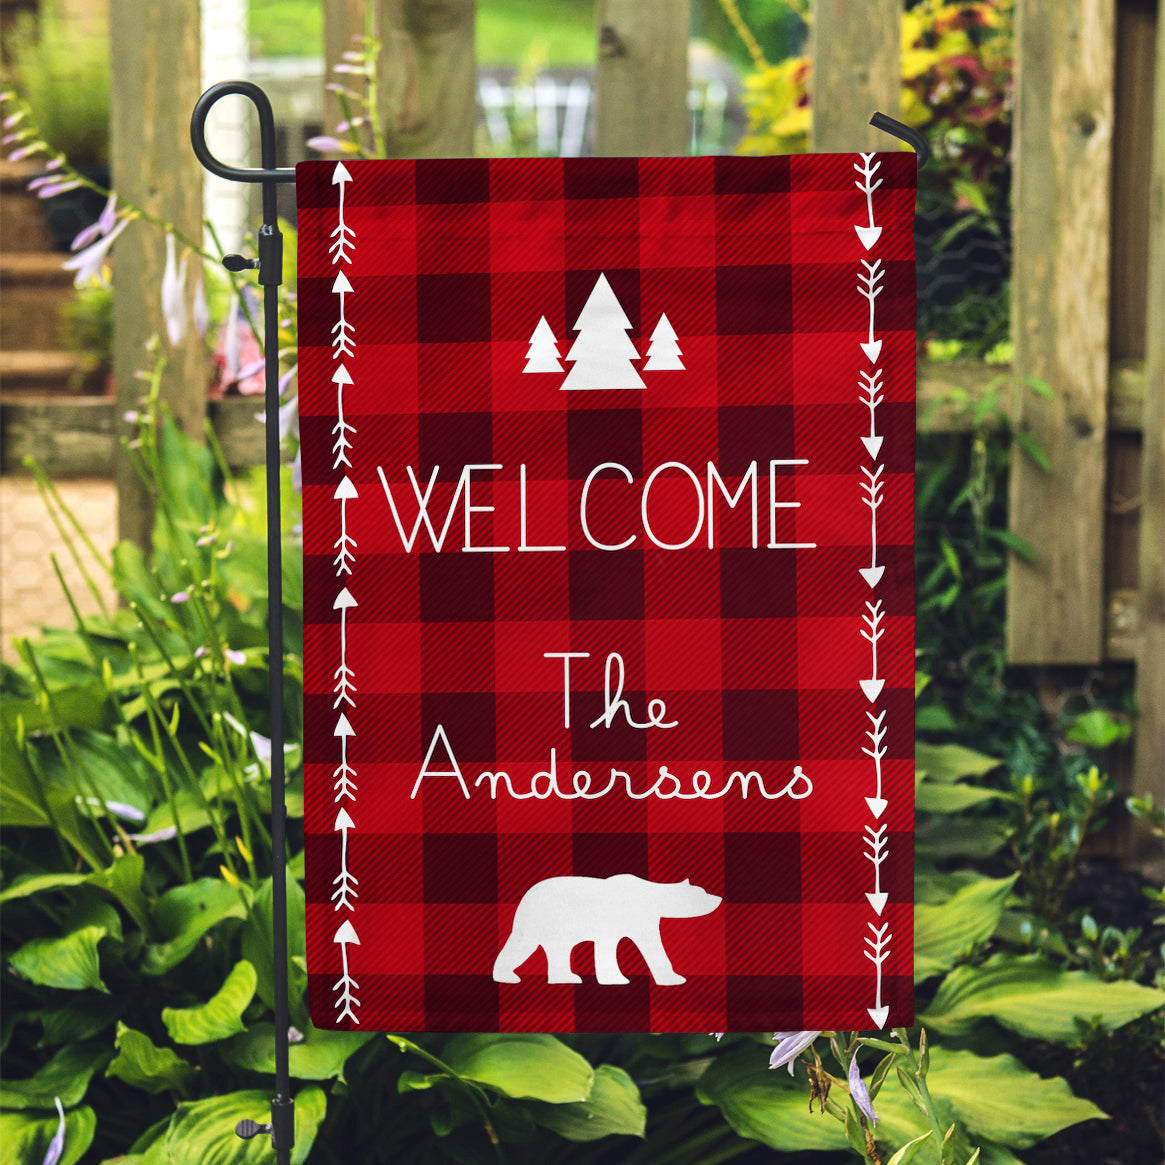 Personalized Garden Flag - Buffalo Plaid Red Check Arrow Home Yard Flag - 12" x 18" - Second East